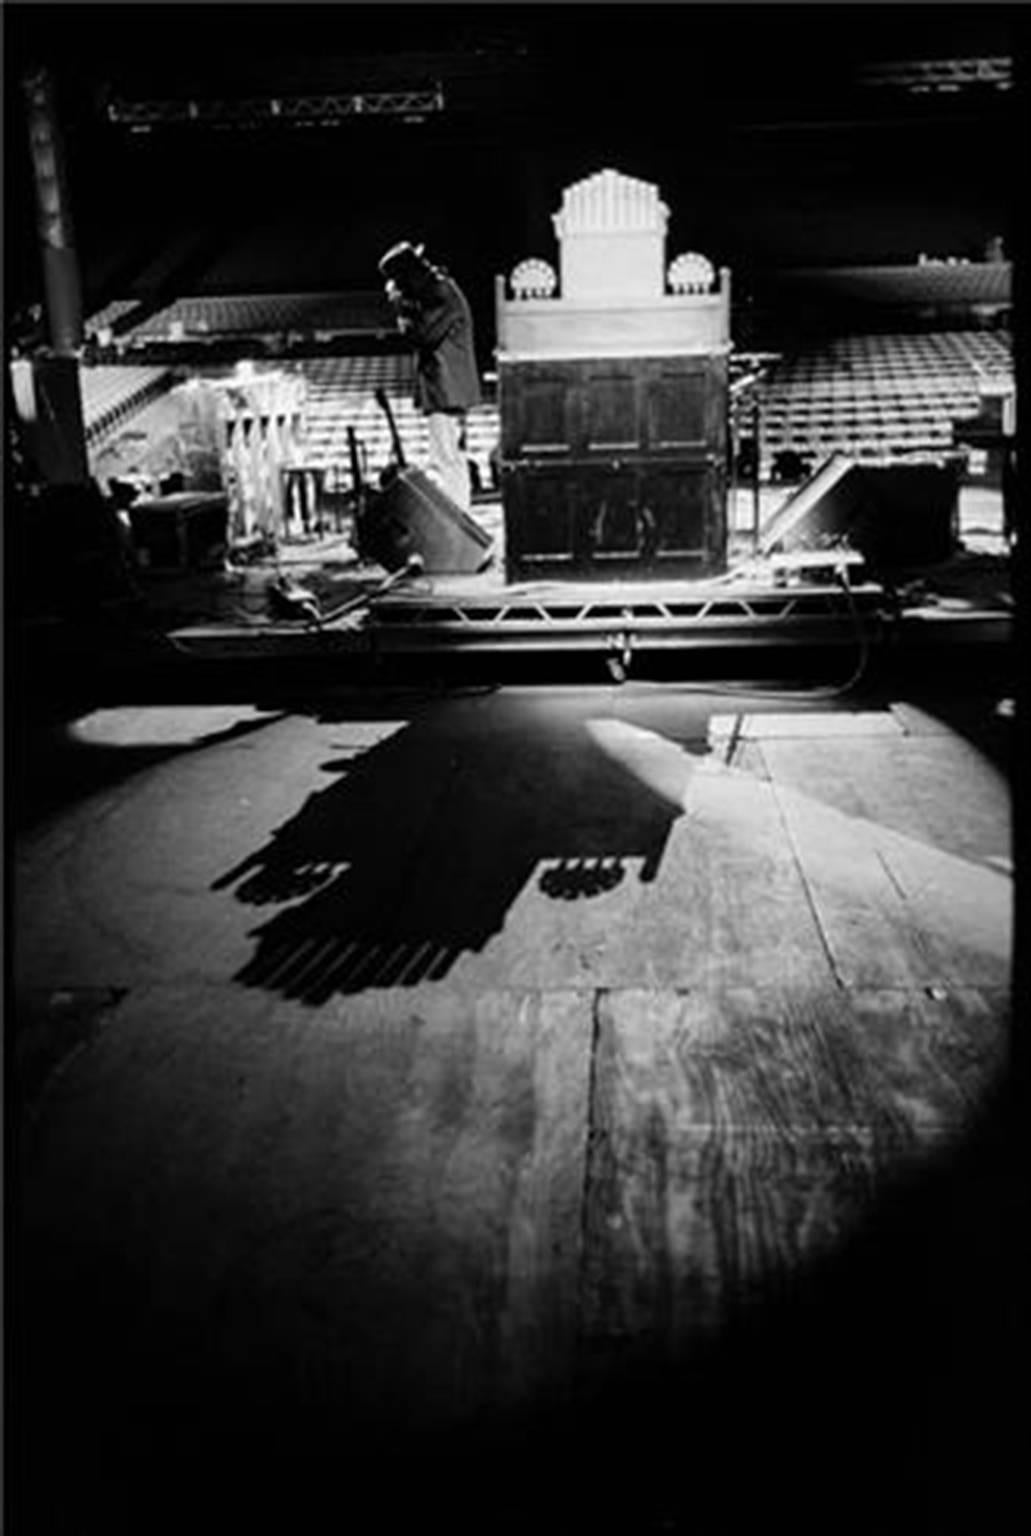 Danny Clinch Black and White Photograph - Neil Young With Organ